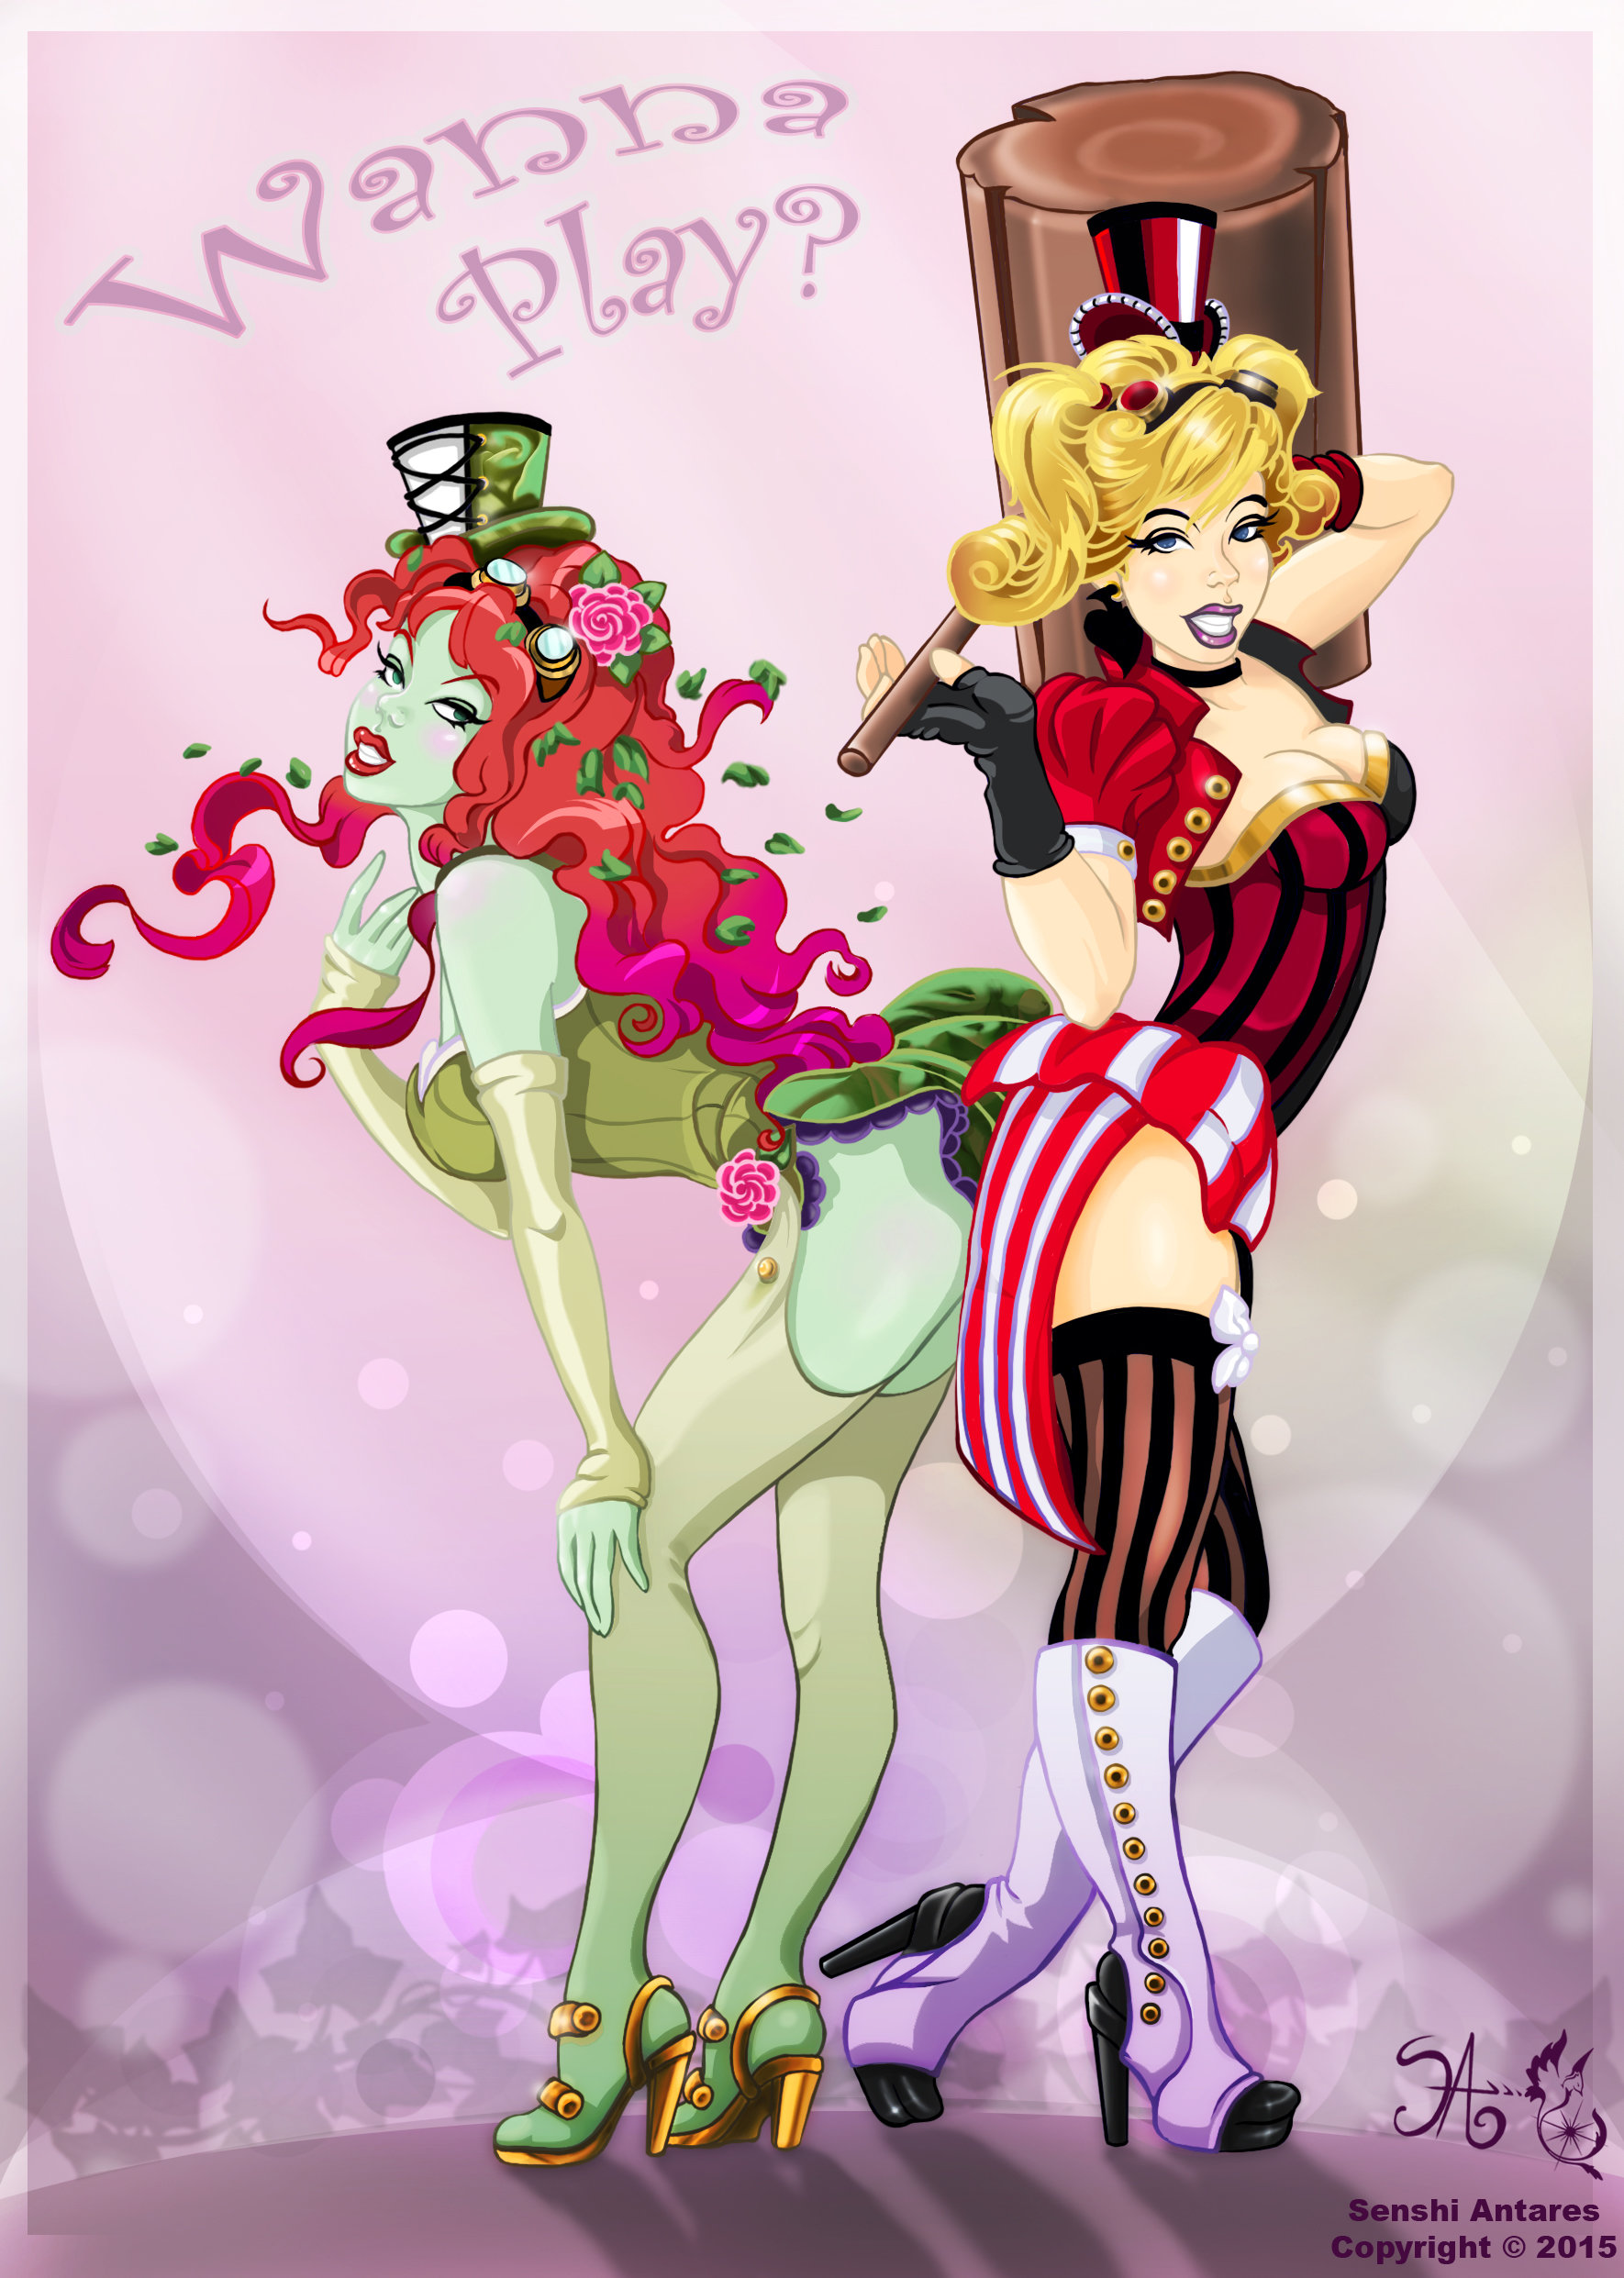 Poison ivy cosplay and harley quinn Harley Quinn